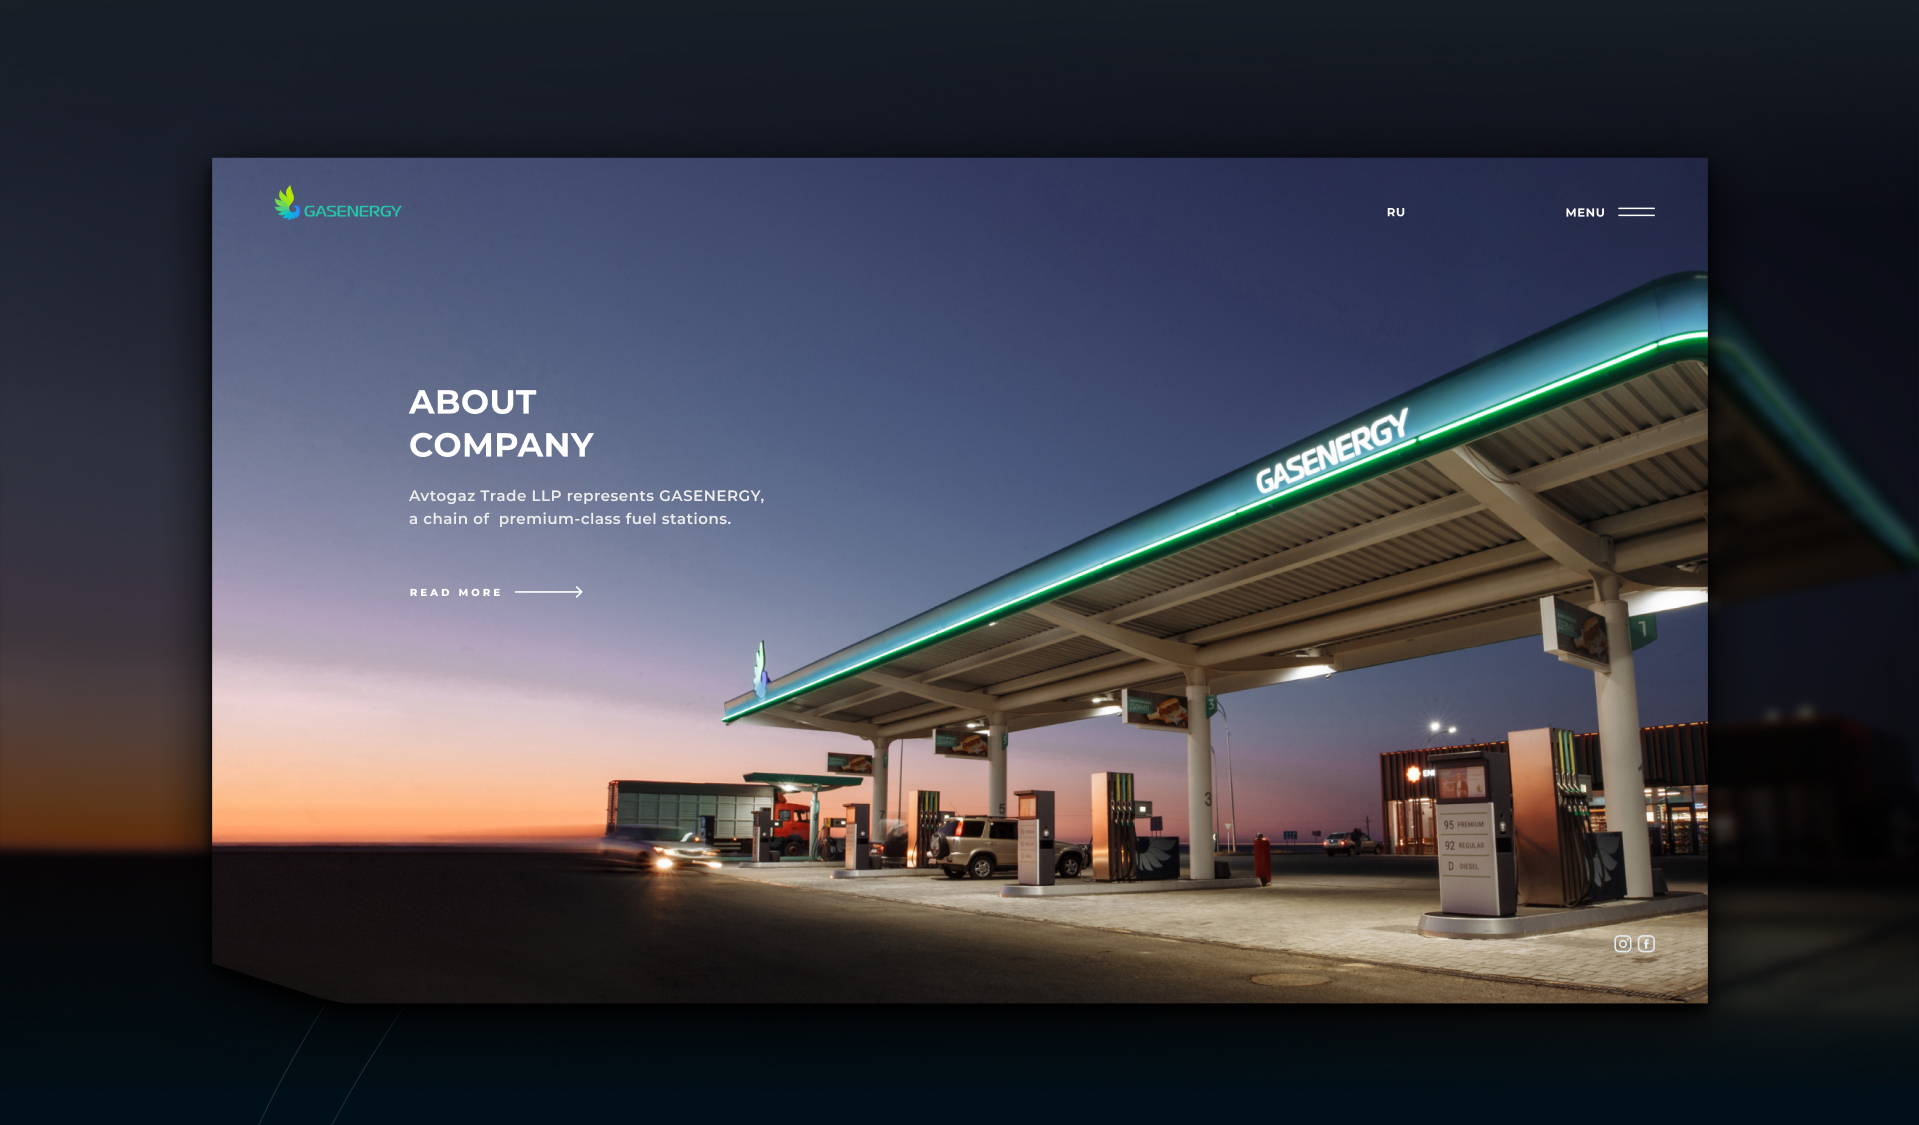 About company page example demonstrates a gas station